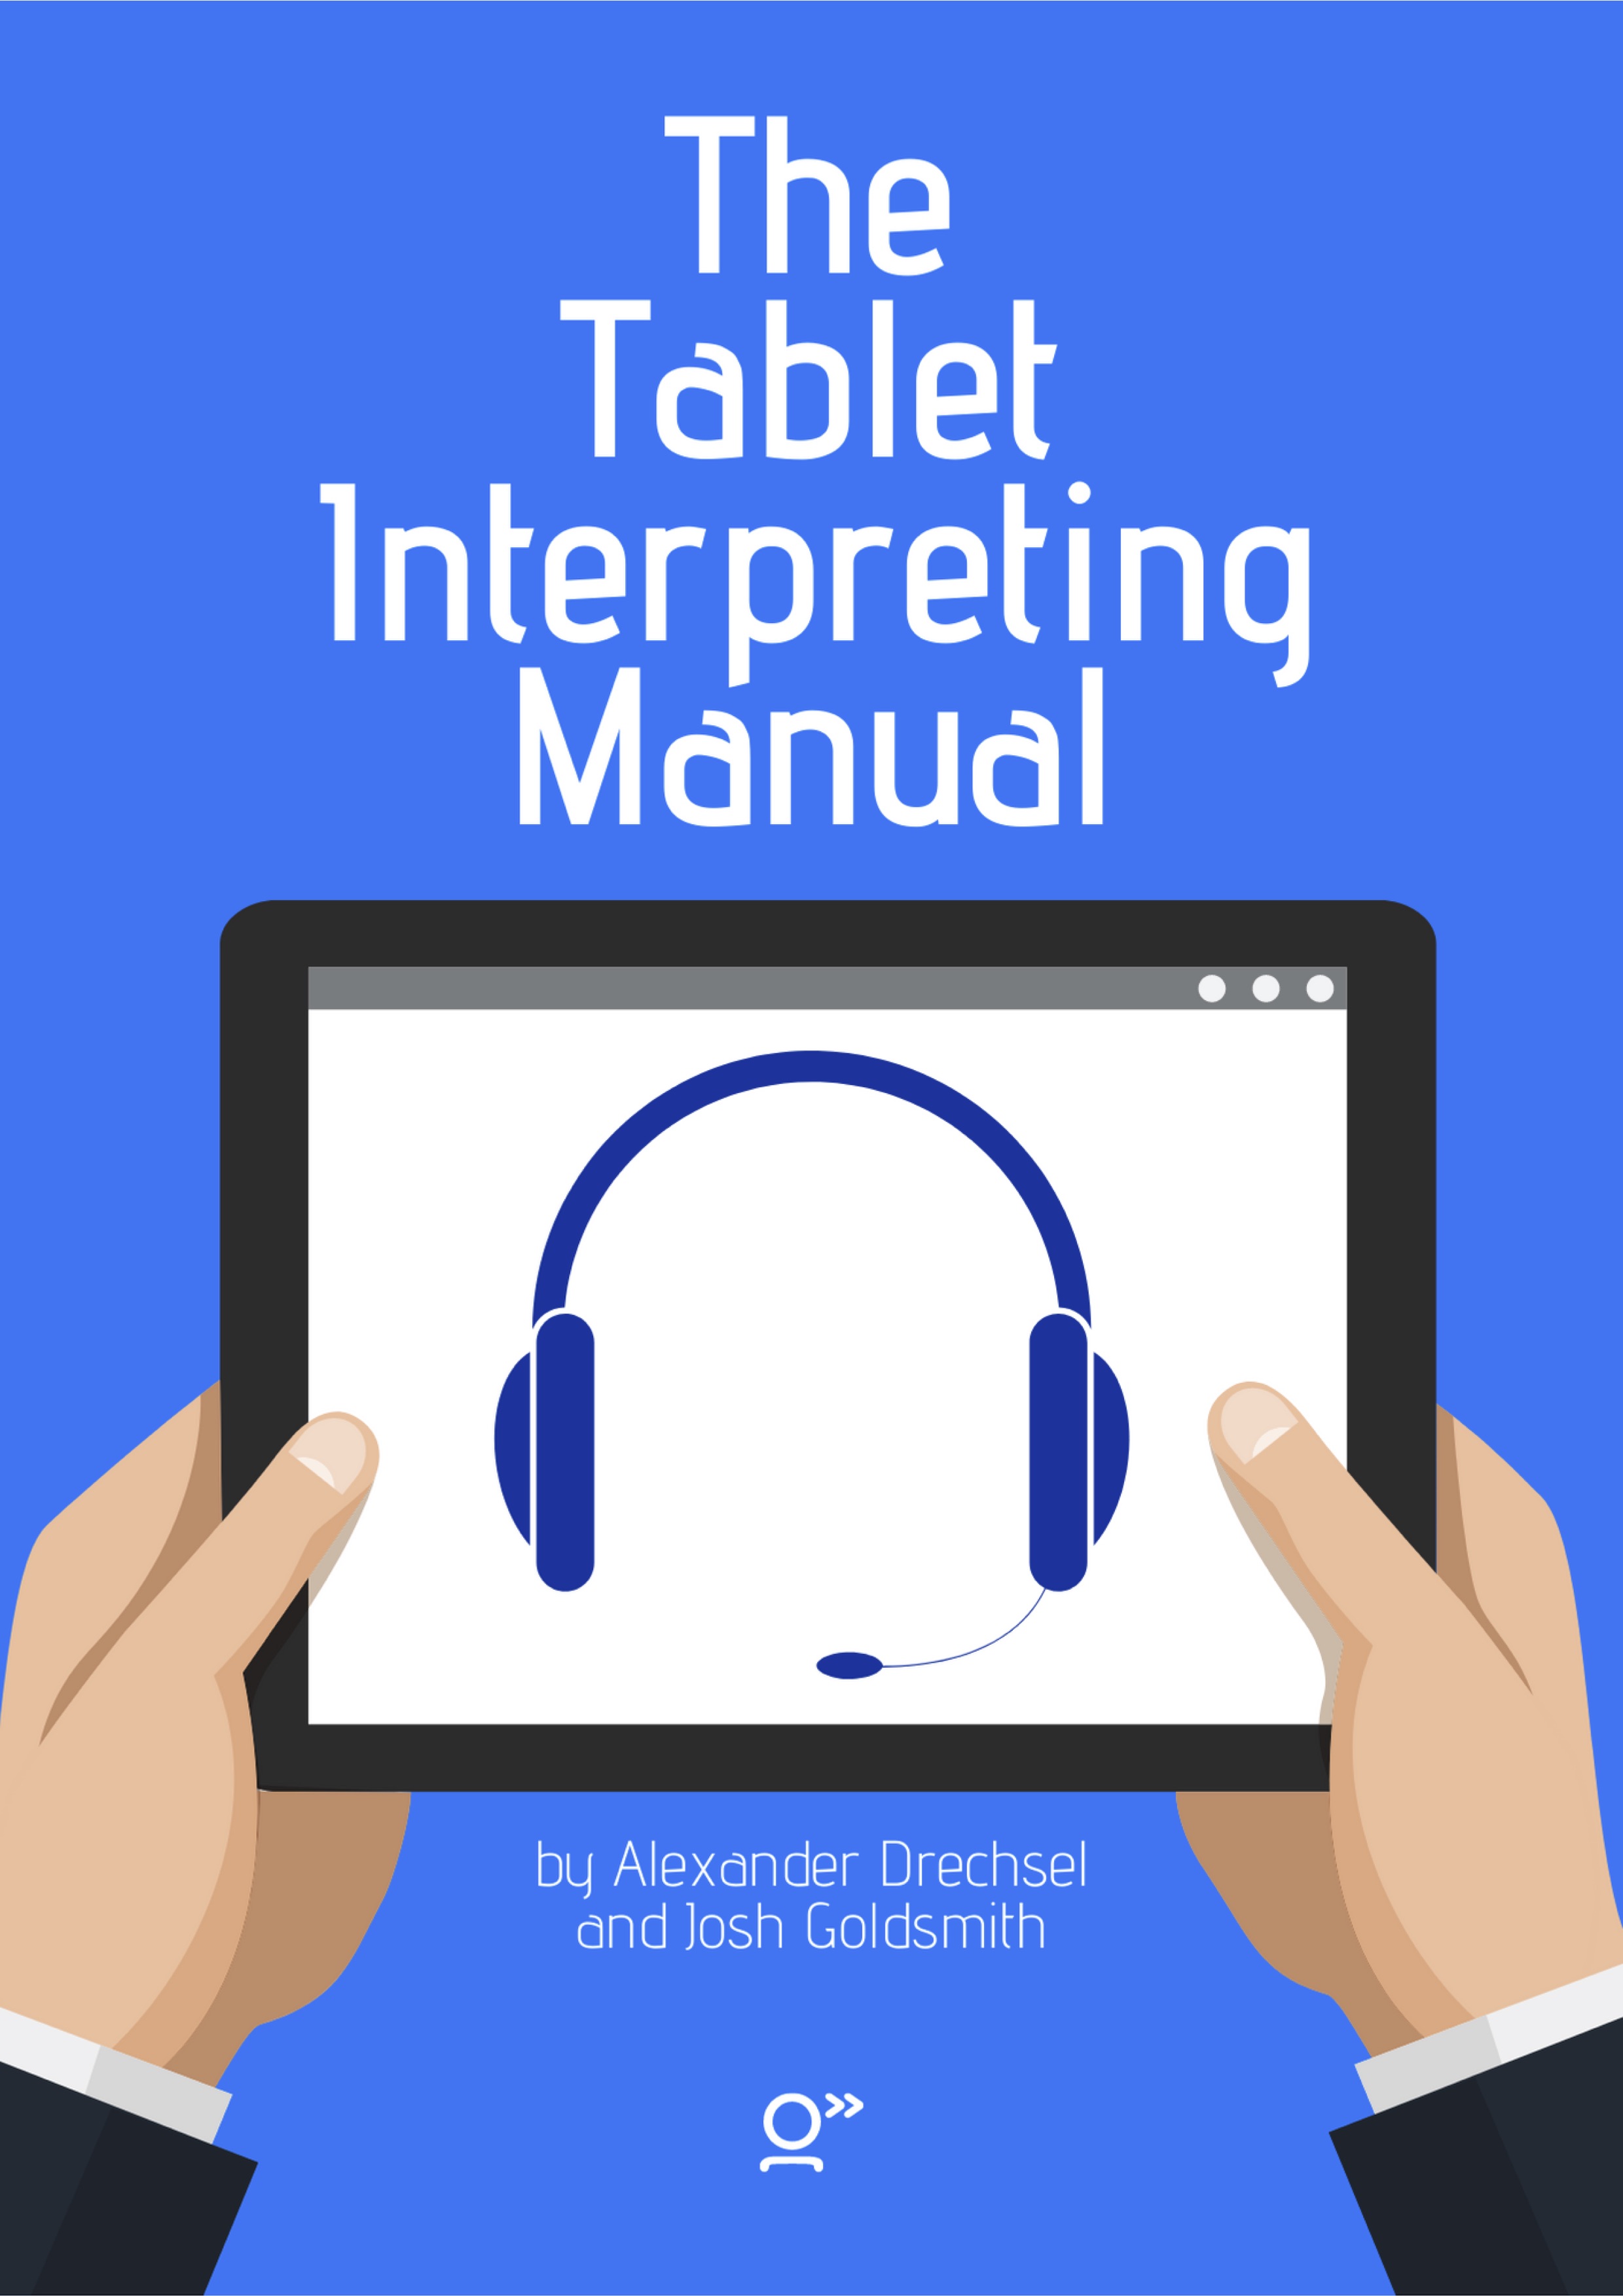 Cover page of the Tablet Interpreting Manual with link to checkout page